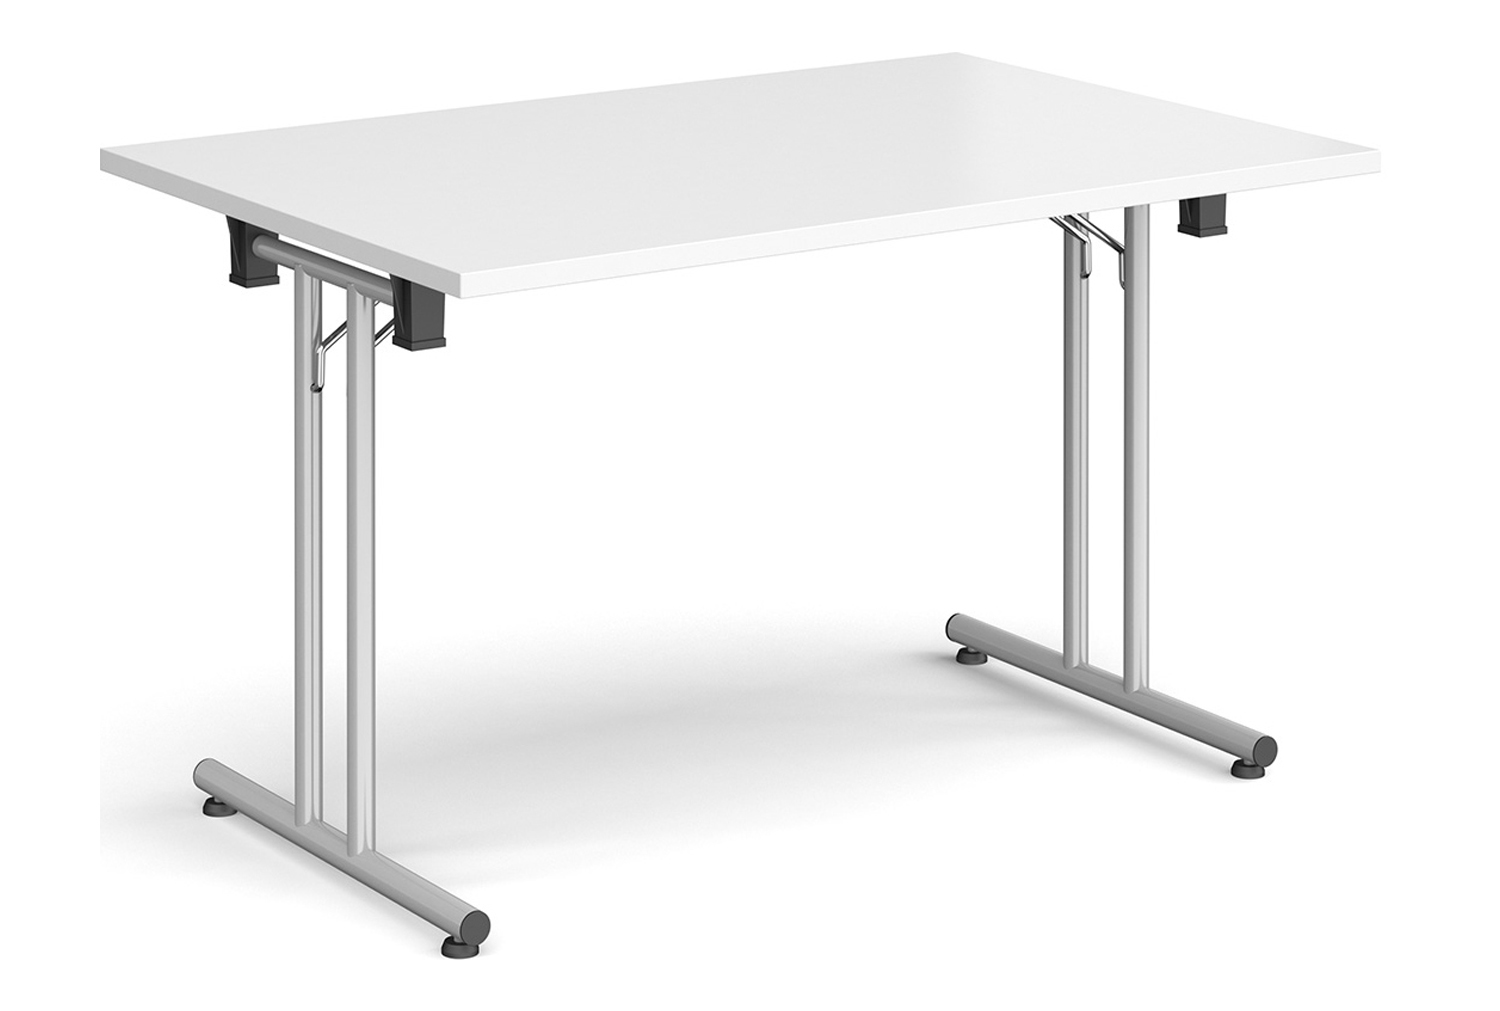 Durand Rectangular Folding Table, 120wx80dx73h (cm), Silver Frame, White, Express Delivery